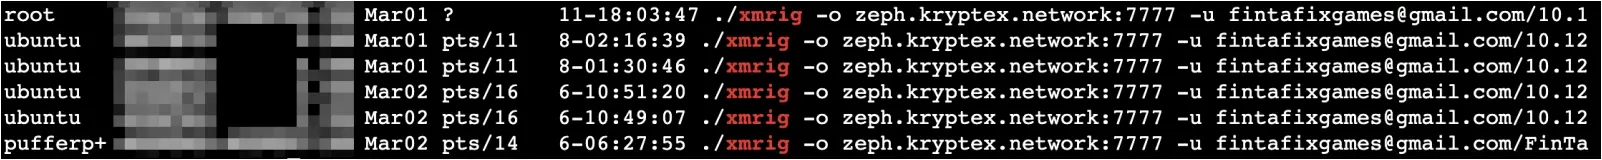 Multiple XMRig miners running on a compromised device